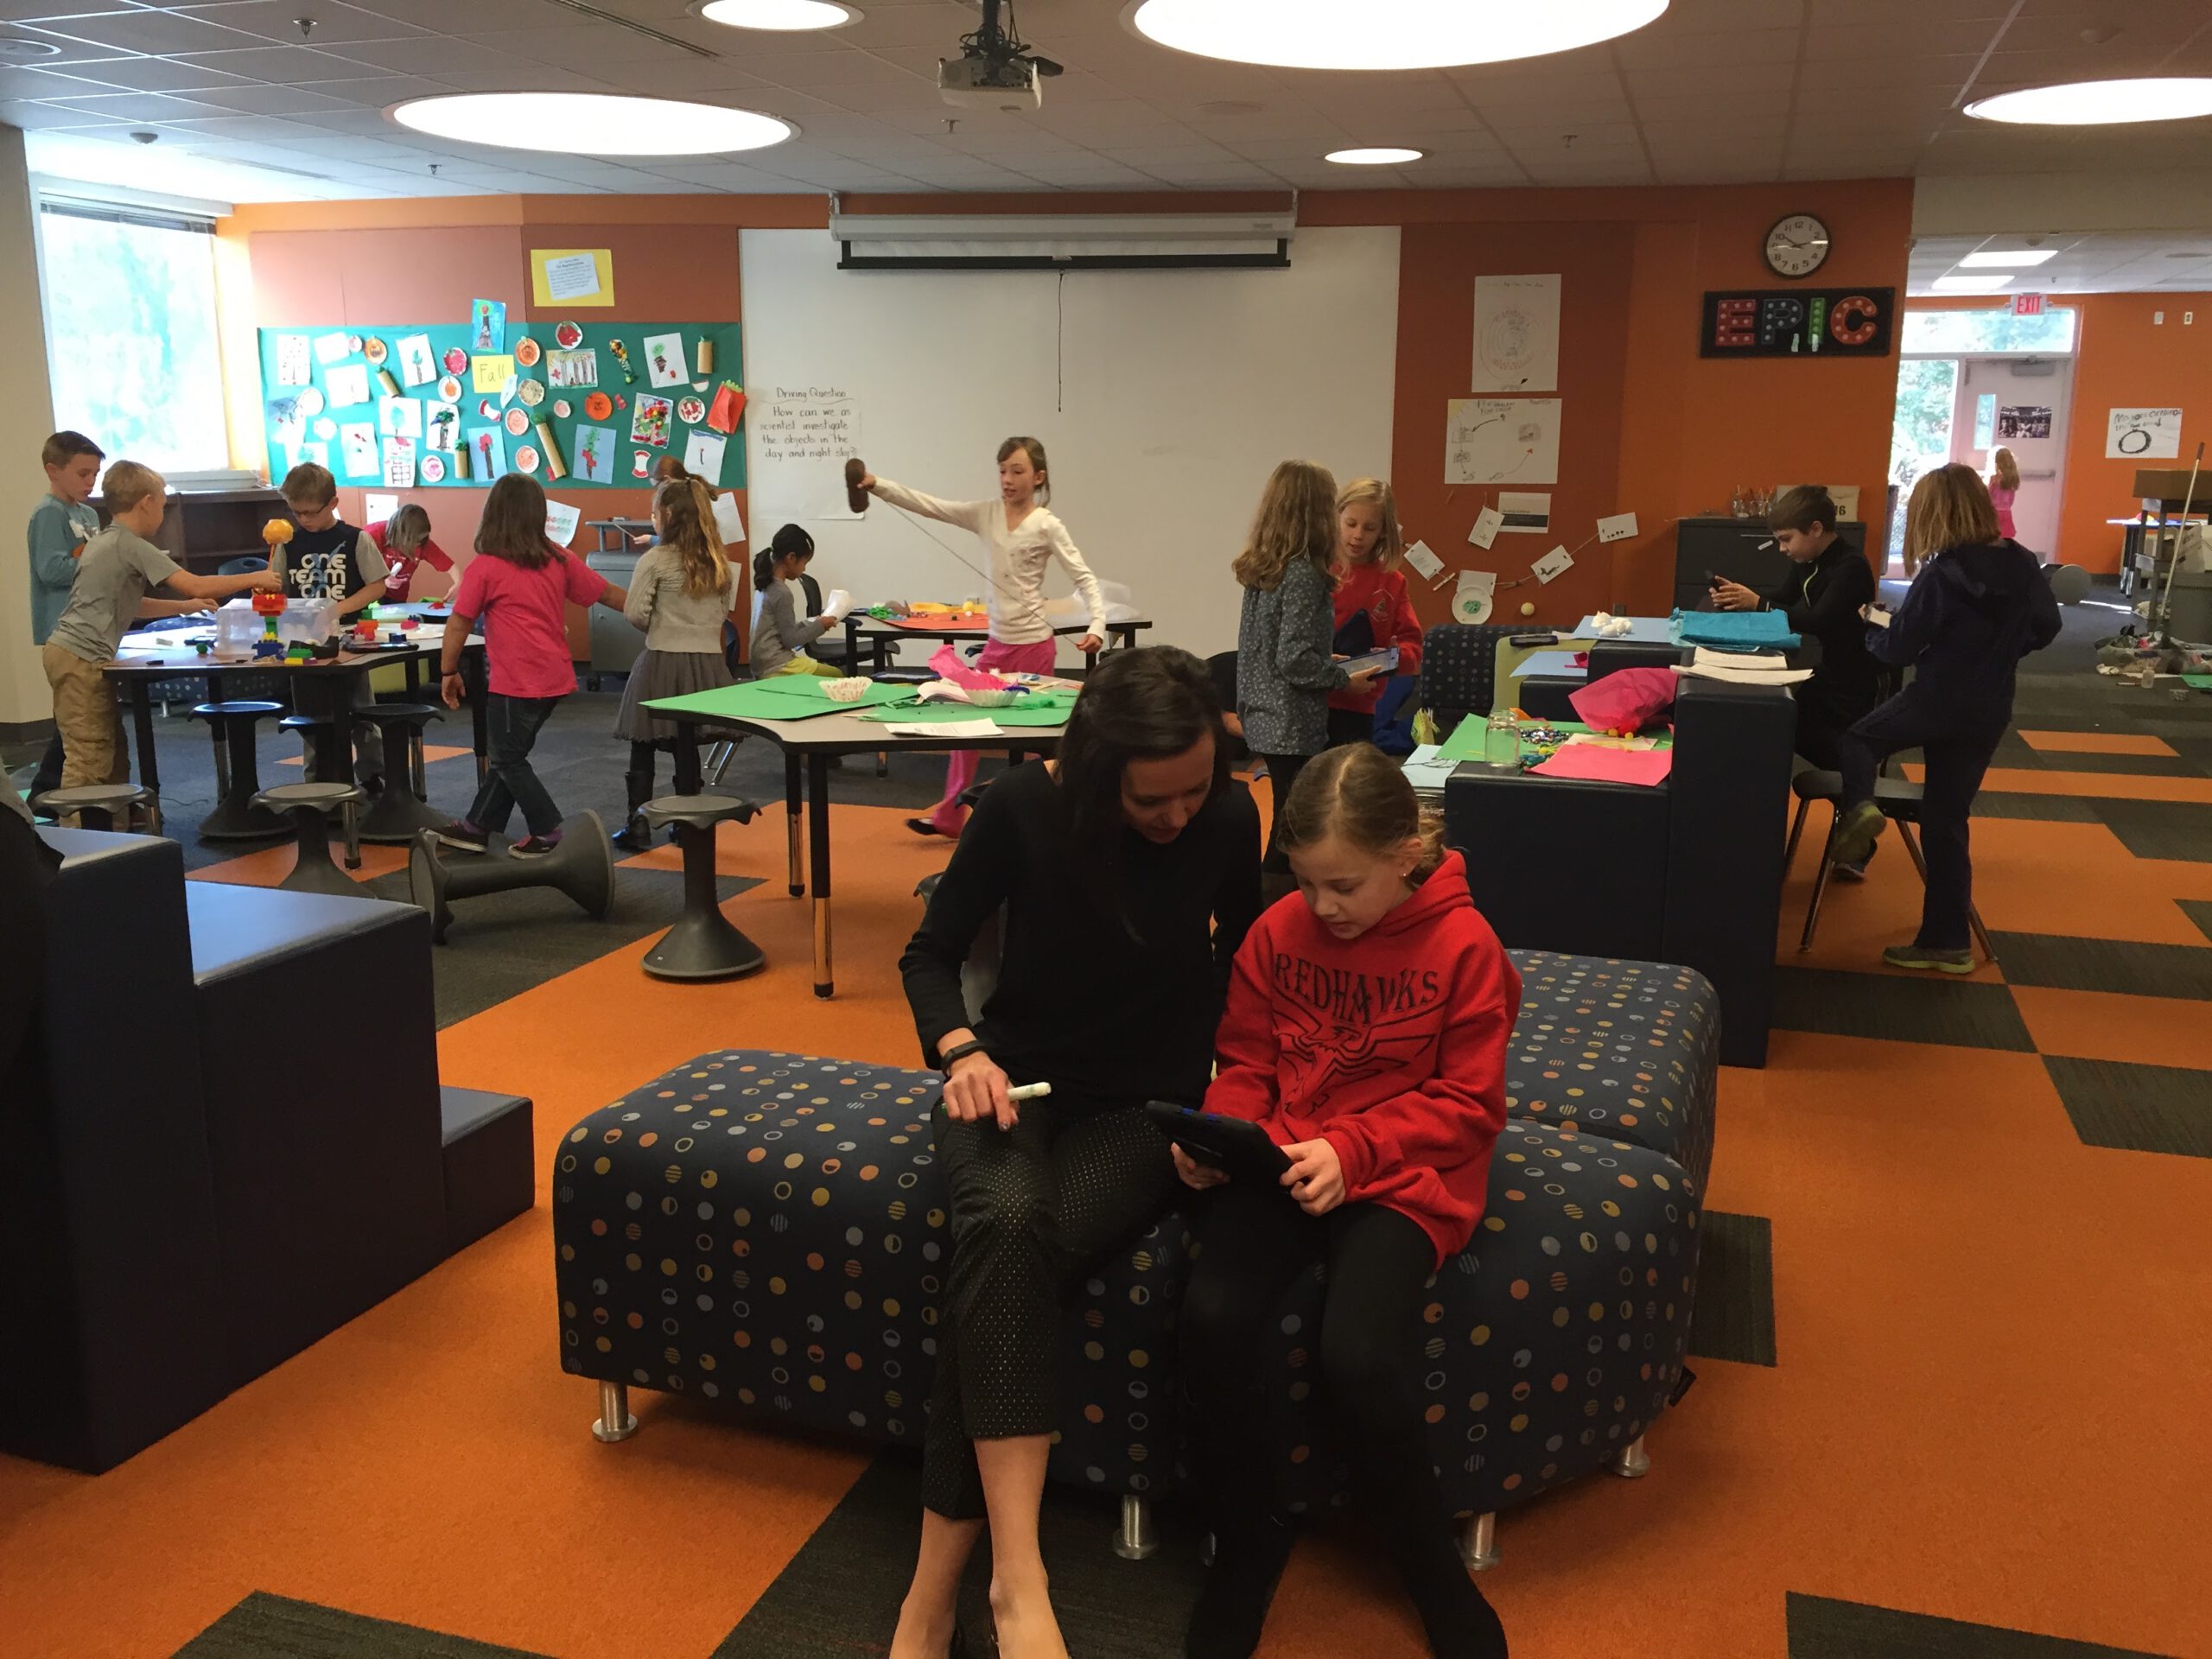 Managing the narrative around learning space design